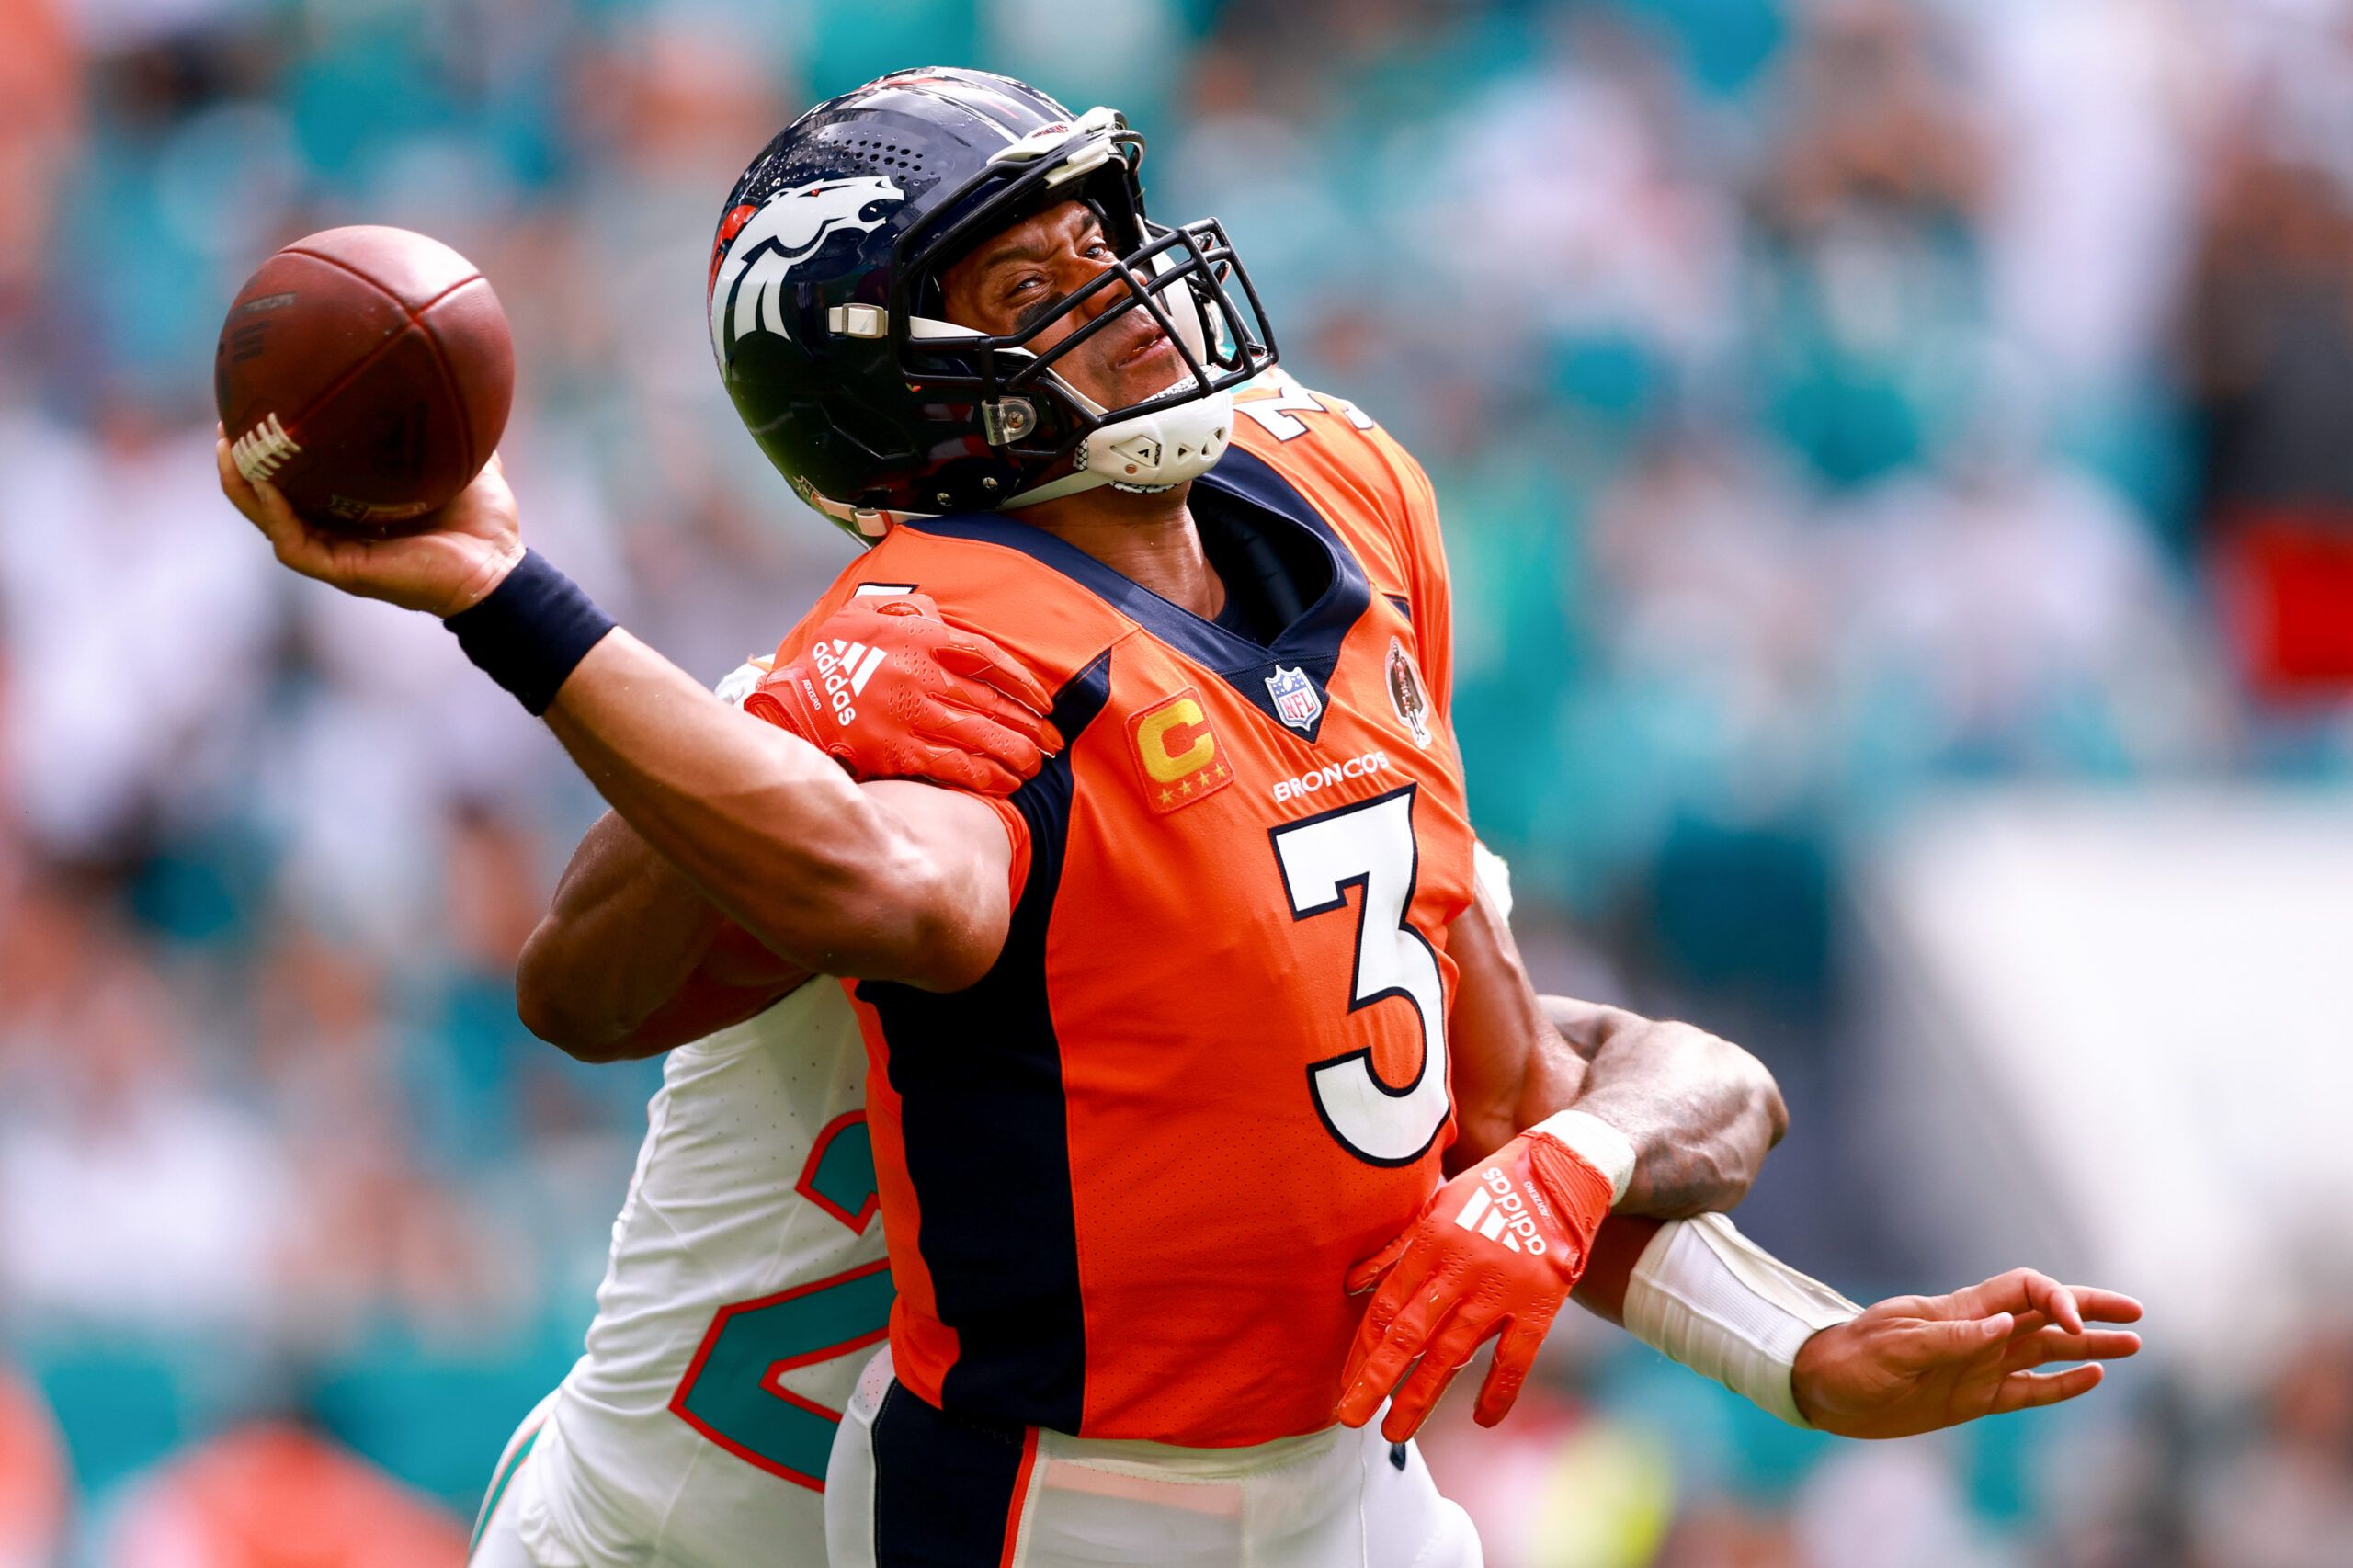 Broncos take historic beatdown in 70-20 loss to Dolphins: “Embarrassing